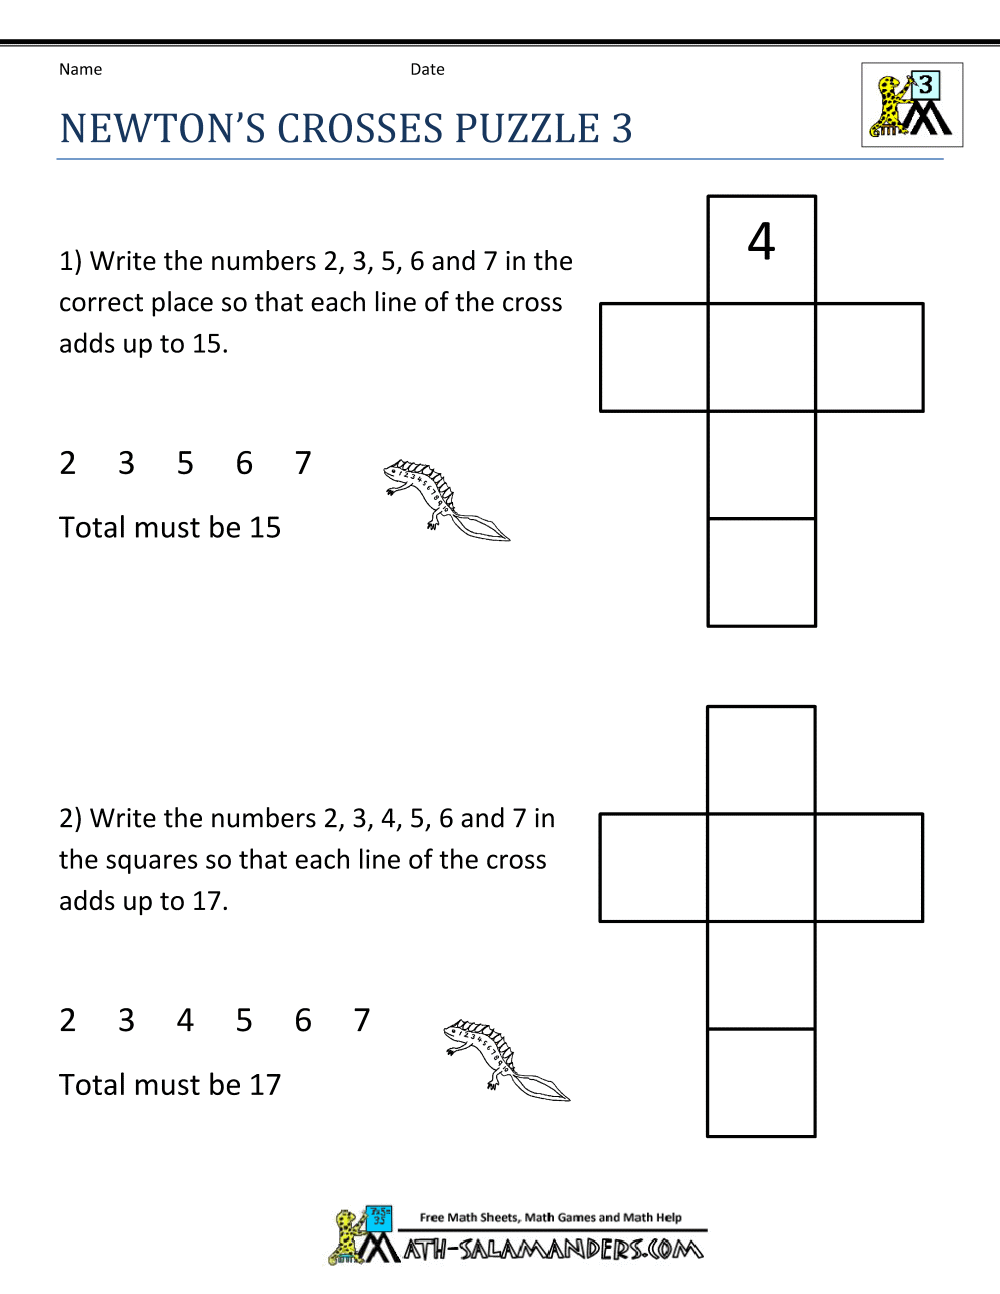 fun-math-worksheets-newtons-crosses-puzzle-3.gif